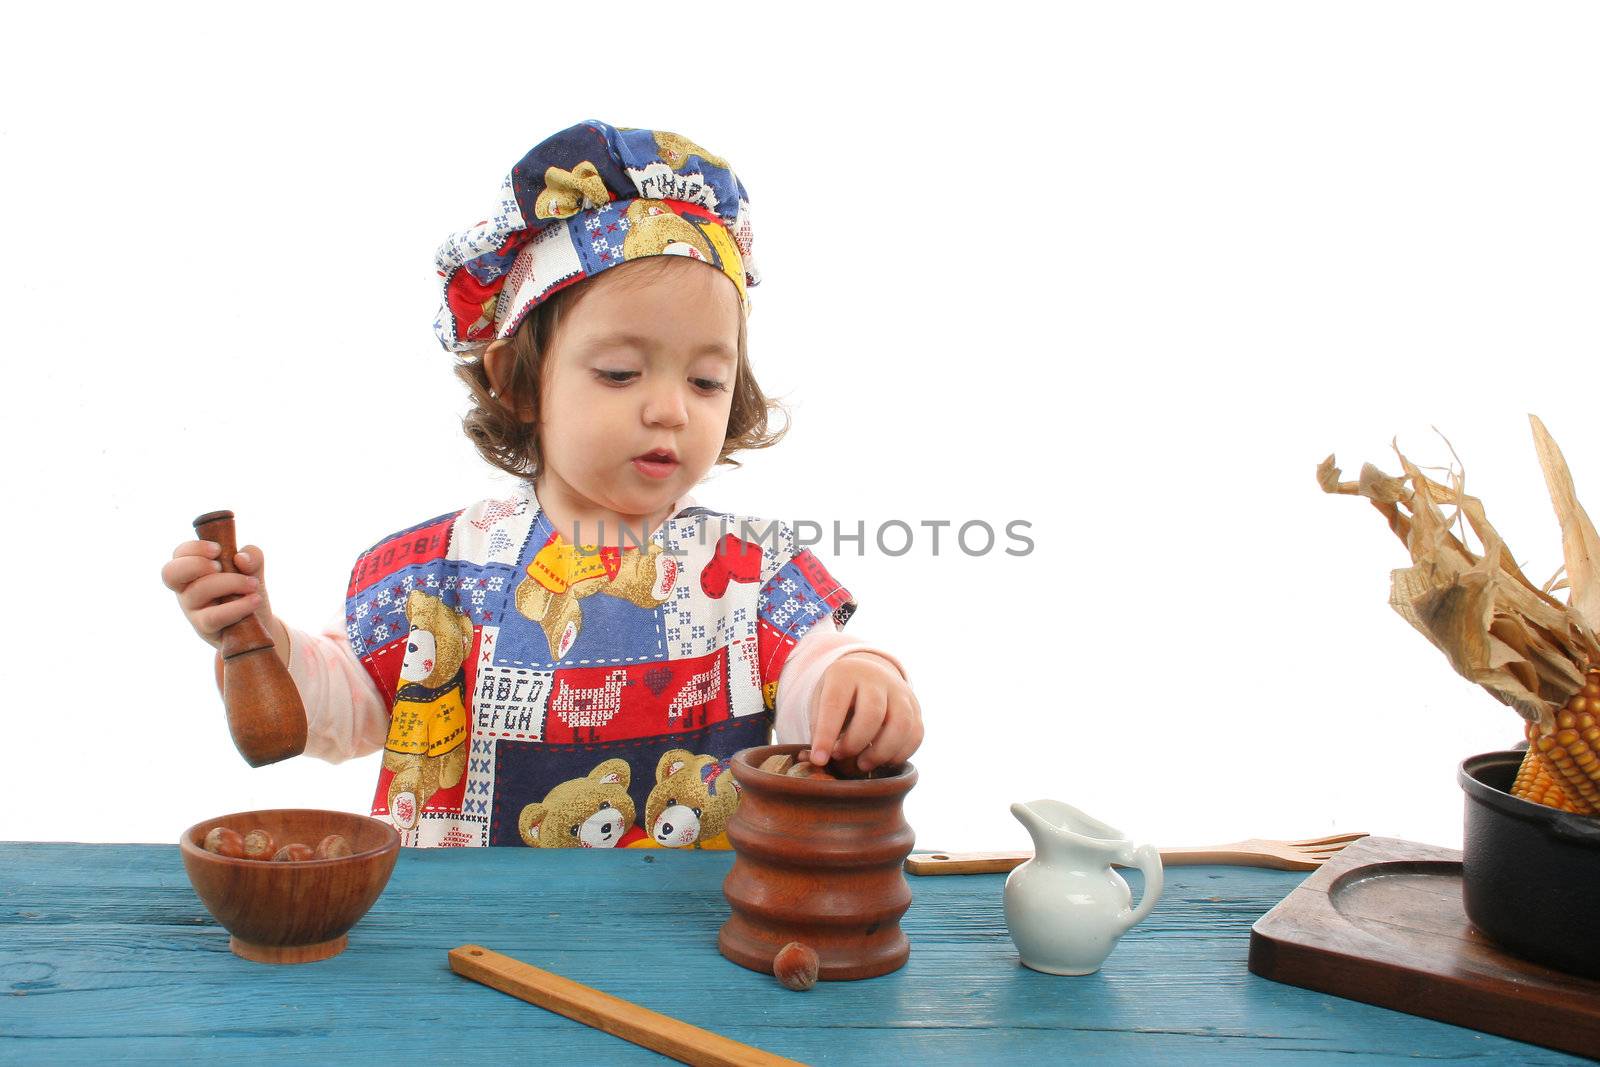 Little girl cooking dressed as a chef by Erdosain